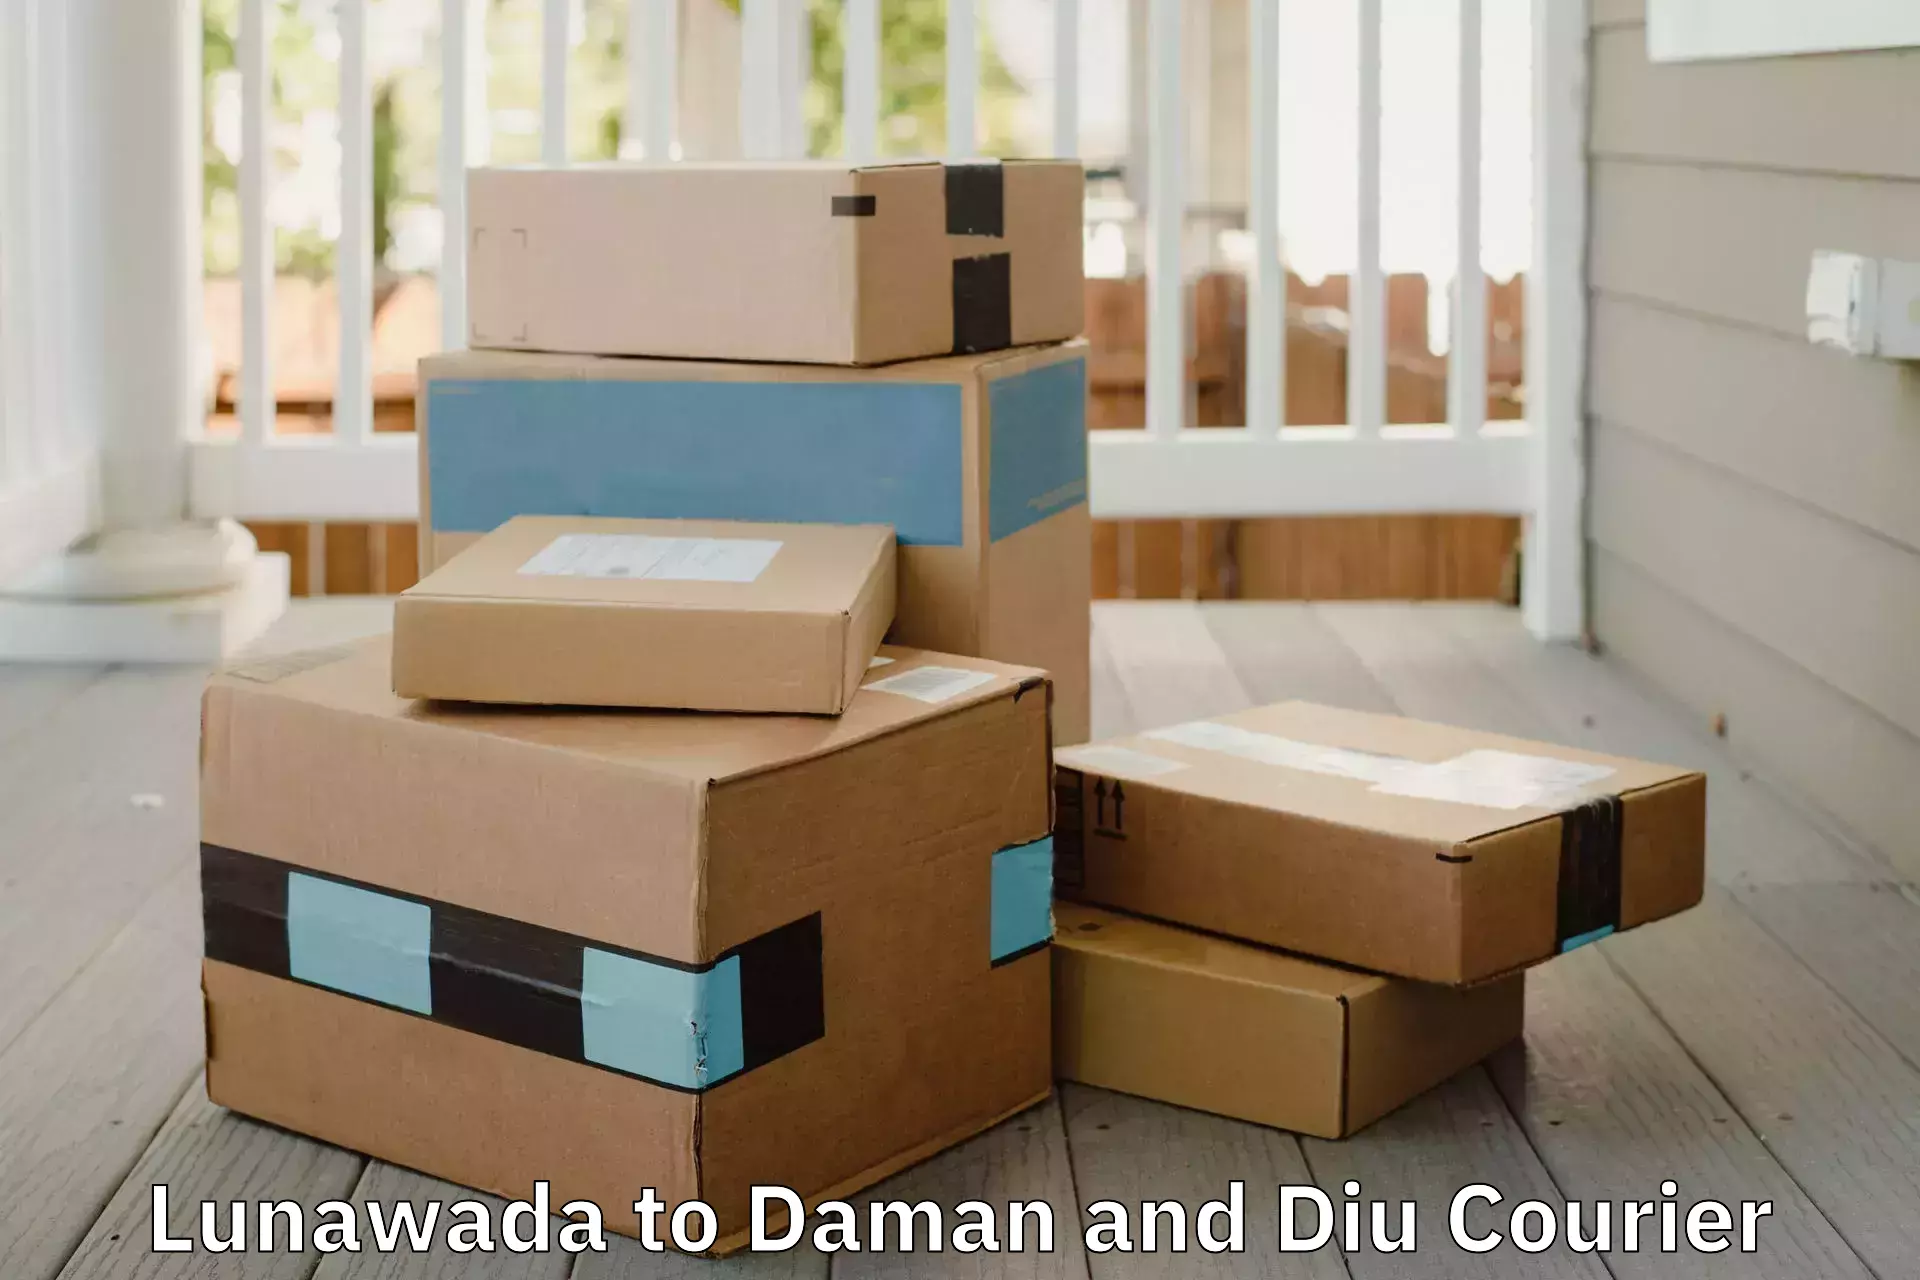 Professional packing services Lunawada to Daman and Diu